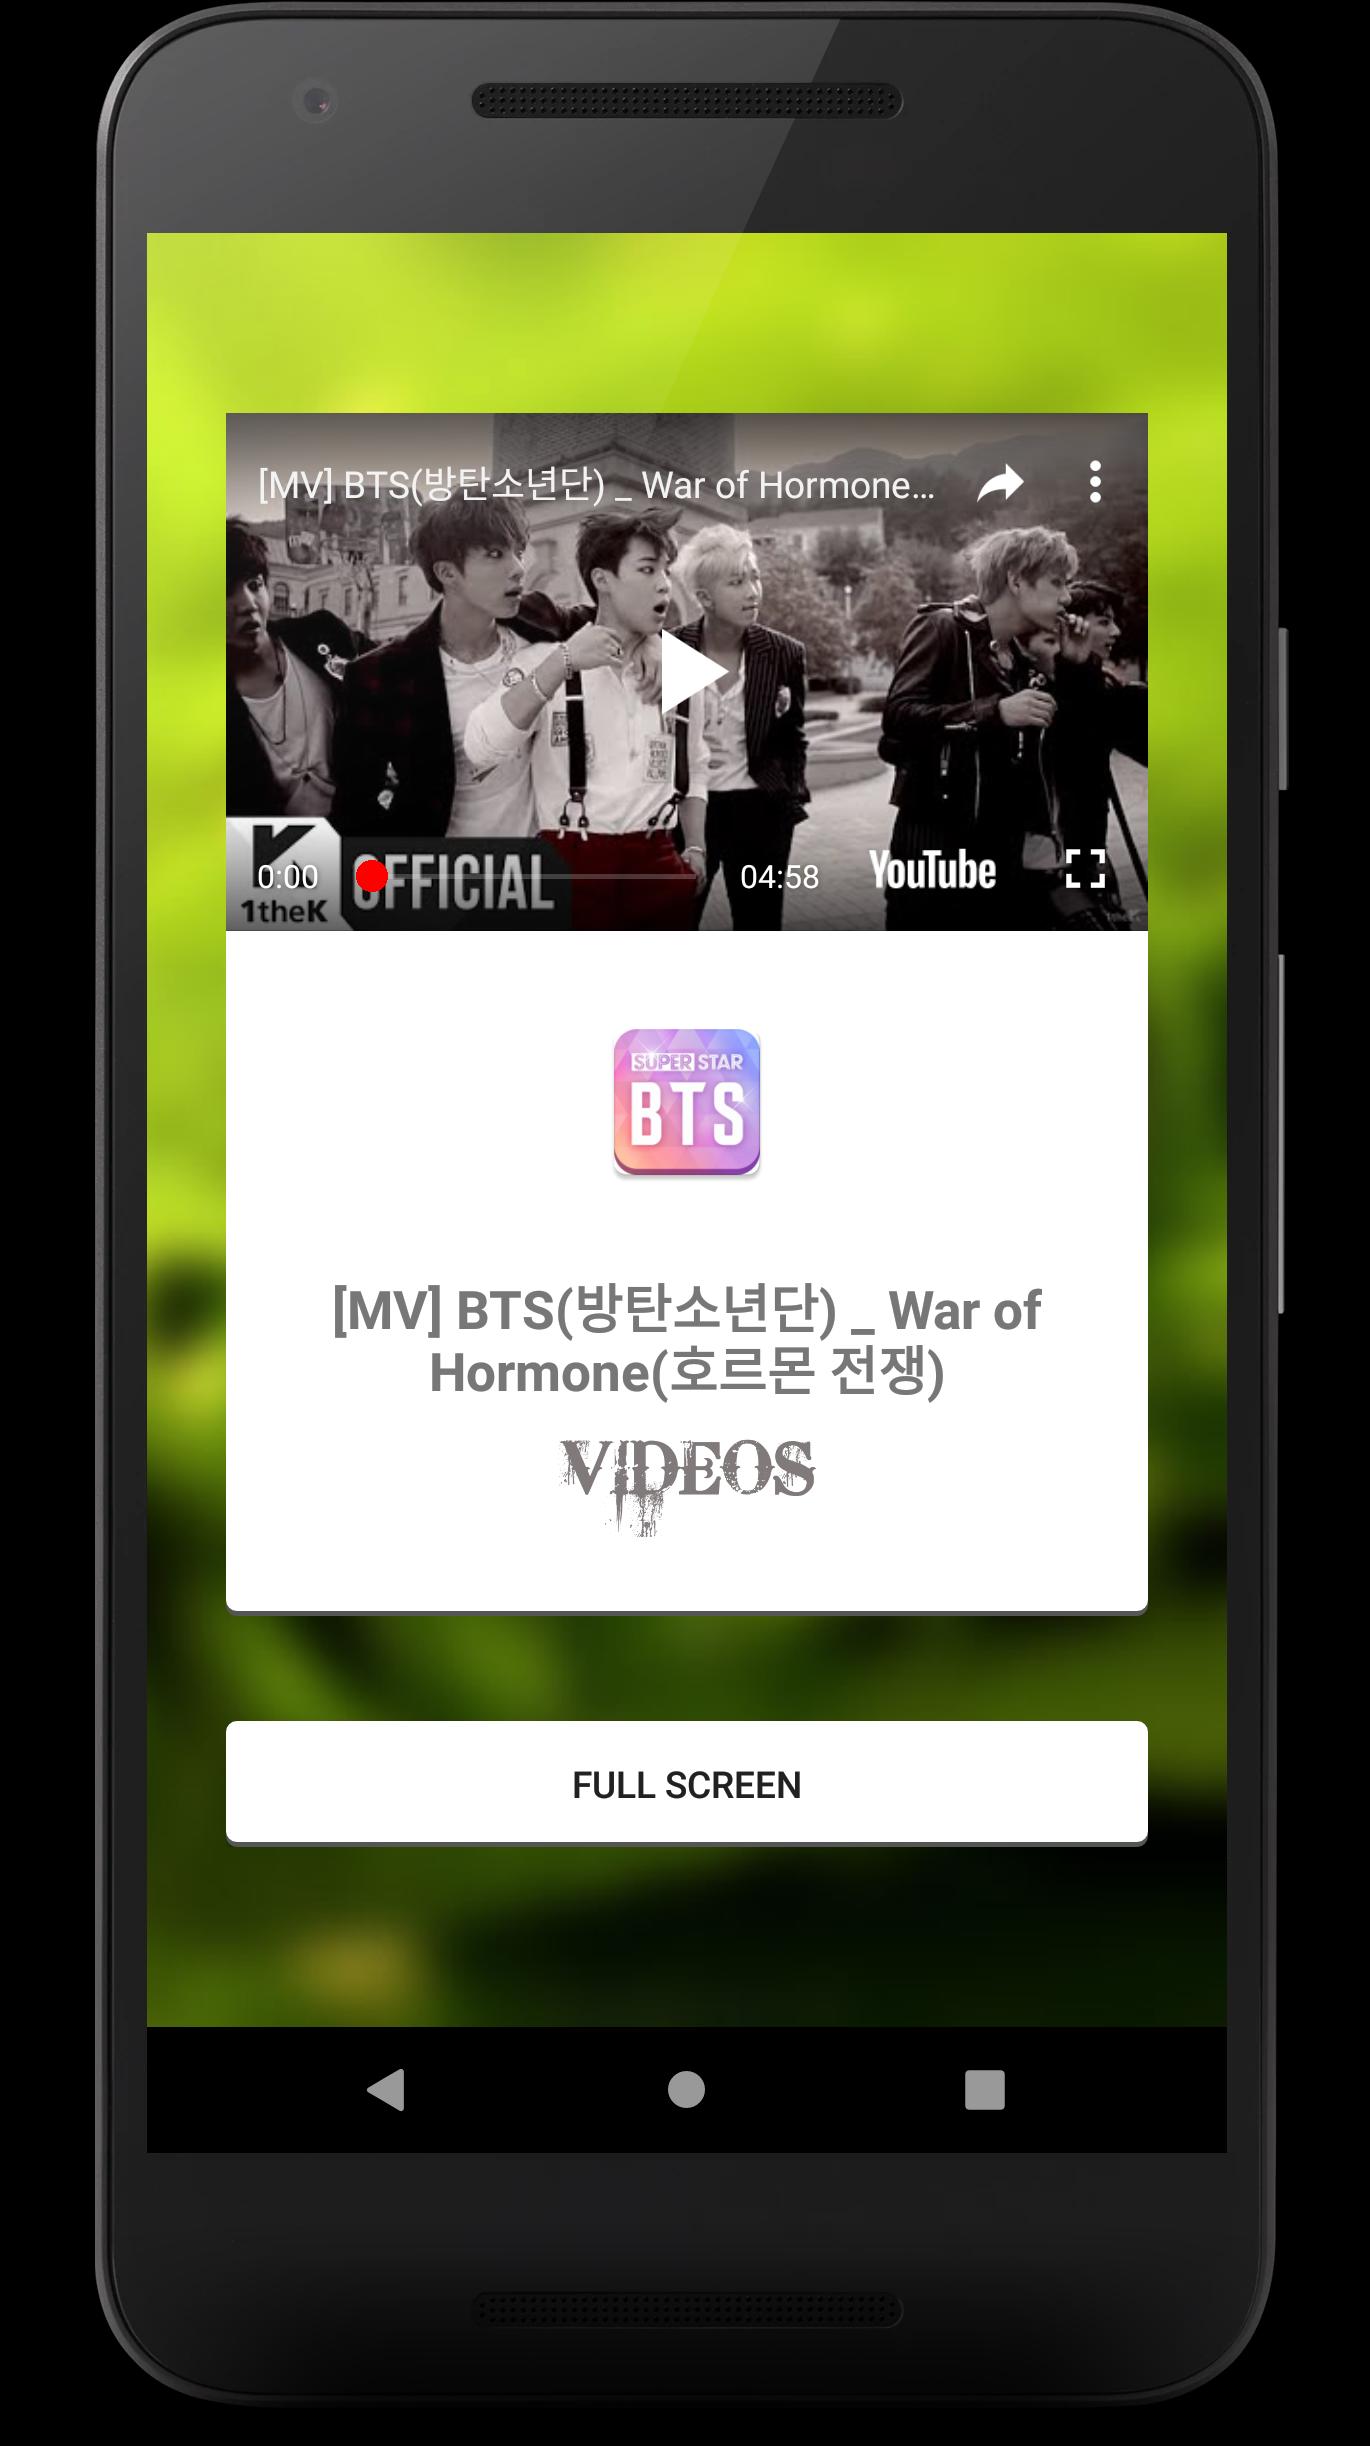 Bts All Music Video 2019 For Android Apk Download - roblox codes for music dna app